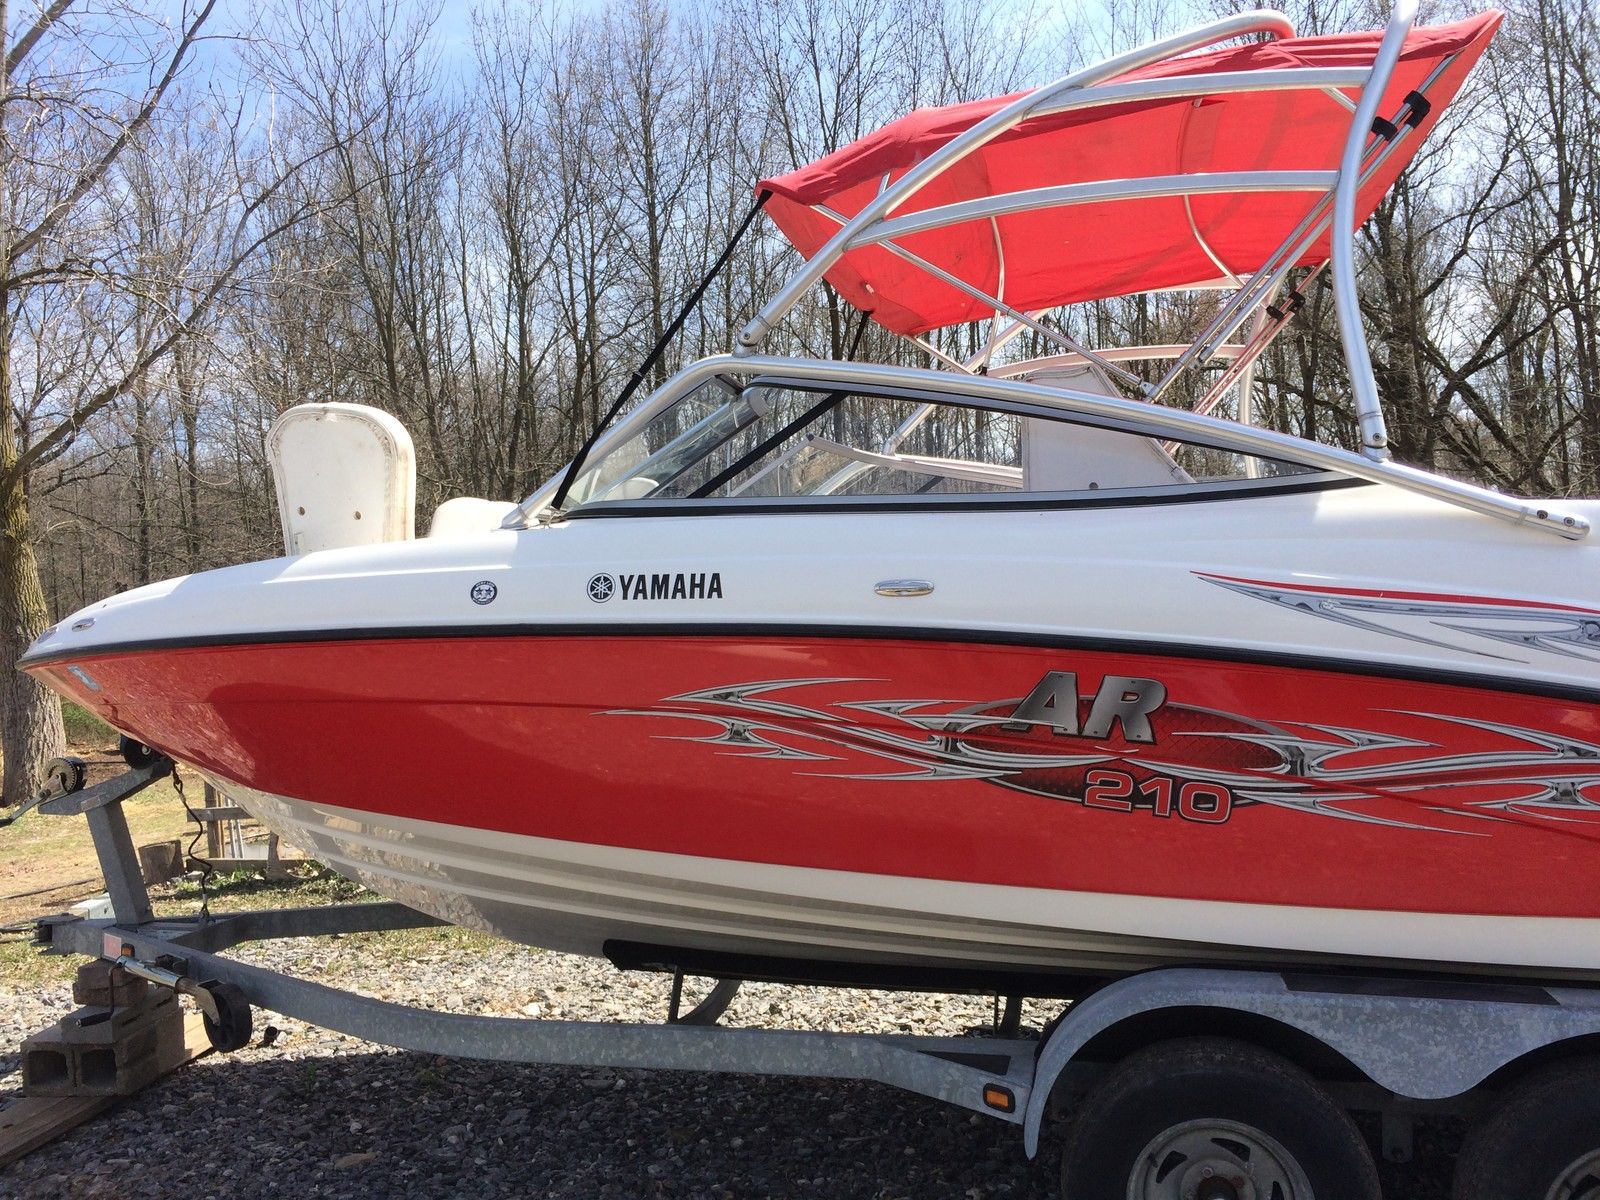 LIKE NEW 2006 YAMAHA AR 210 21 FT JET BOAT EXCELLENT PRICE AND CONDITION